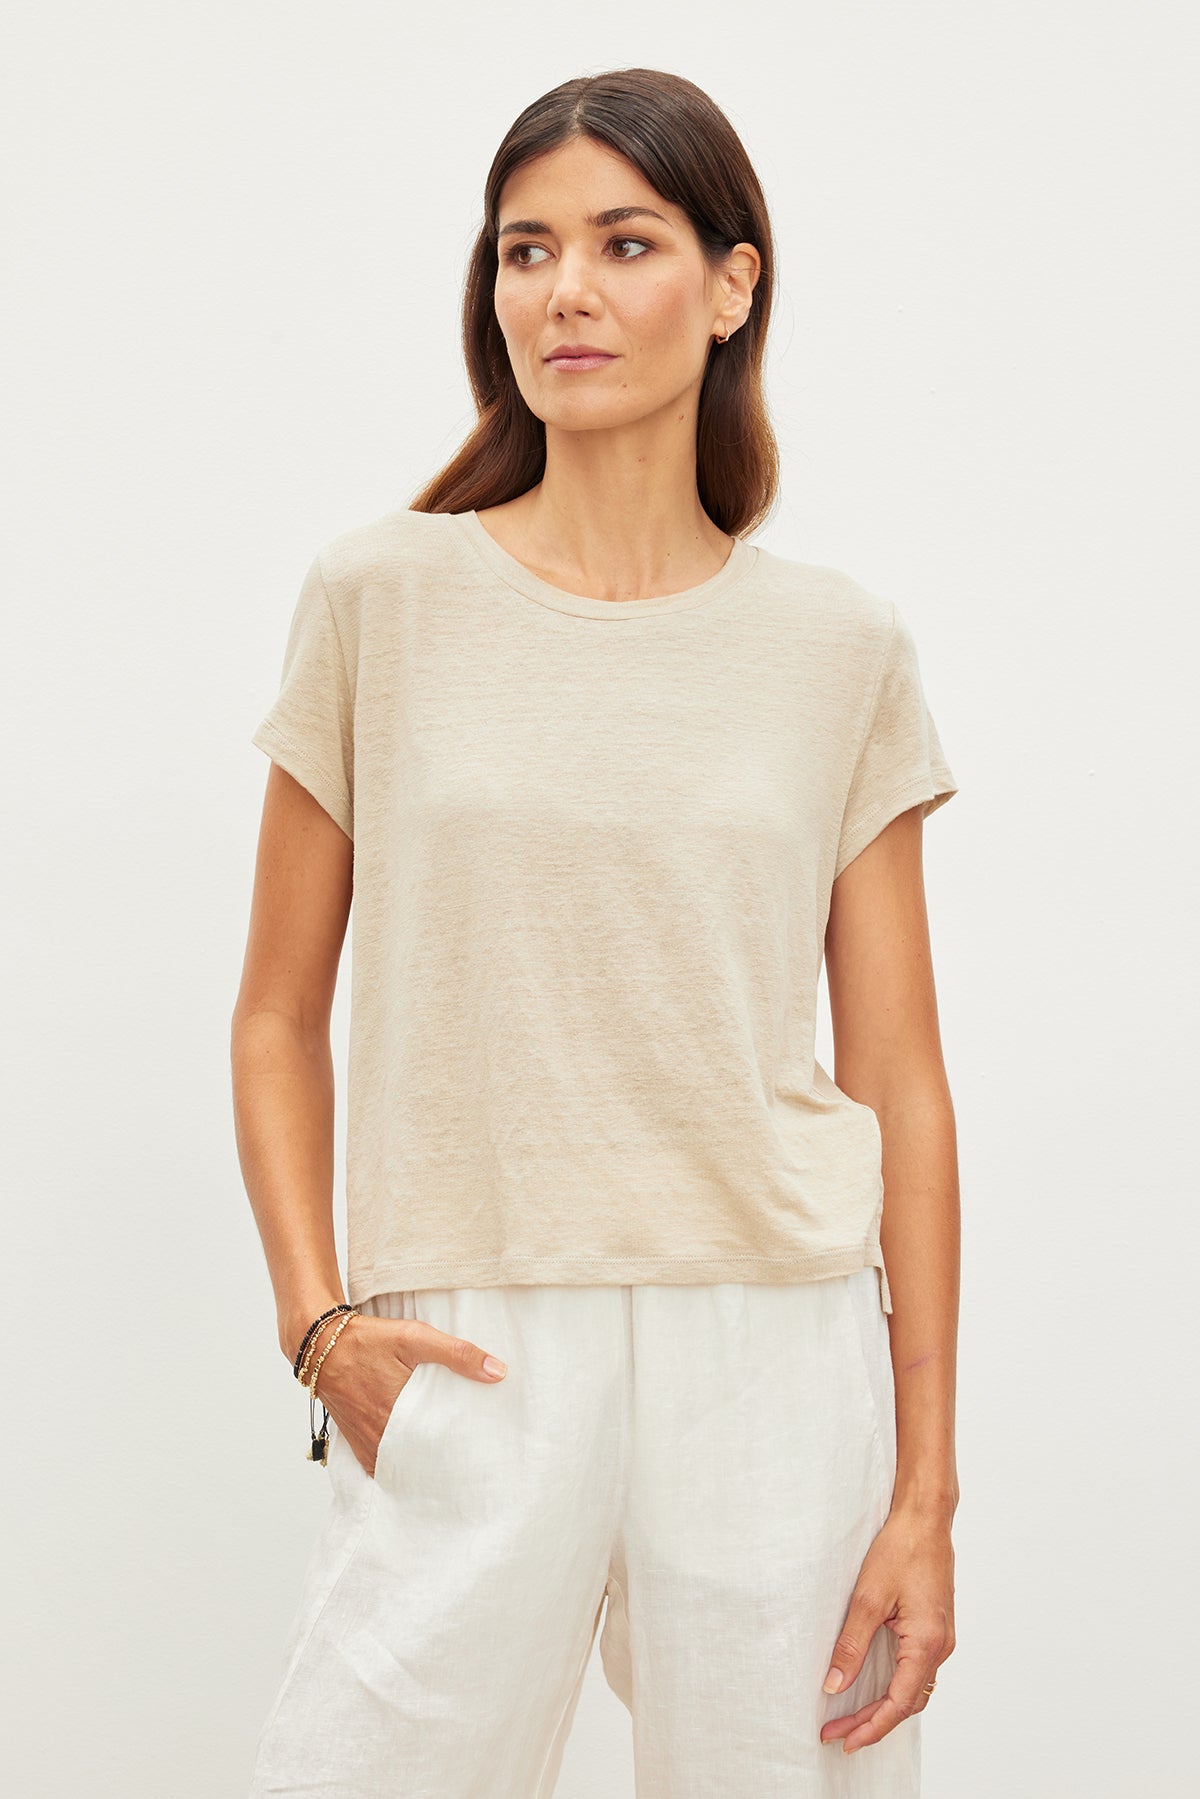   The model is wearing a Velvet by Graham & Spencer beige linen tee and white pants. 